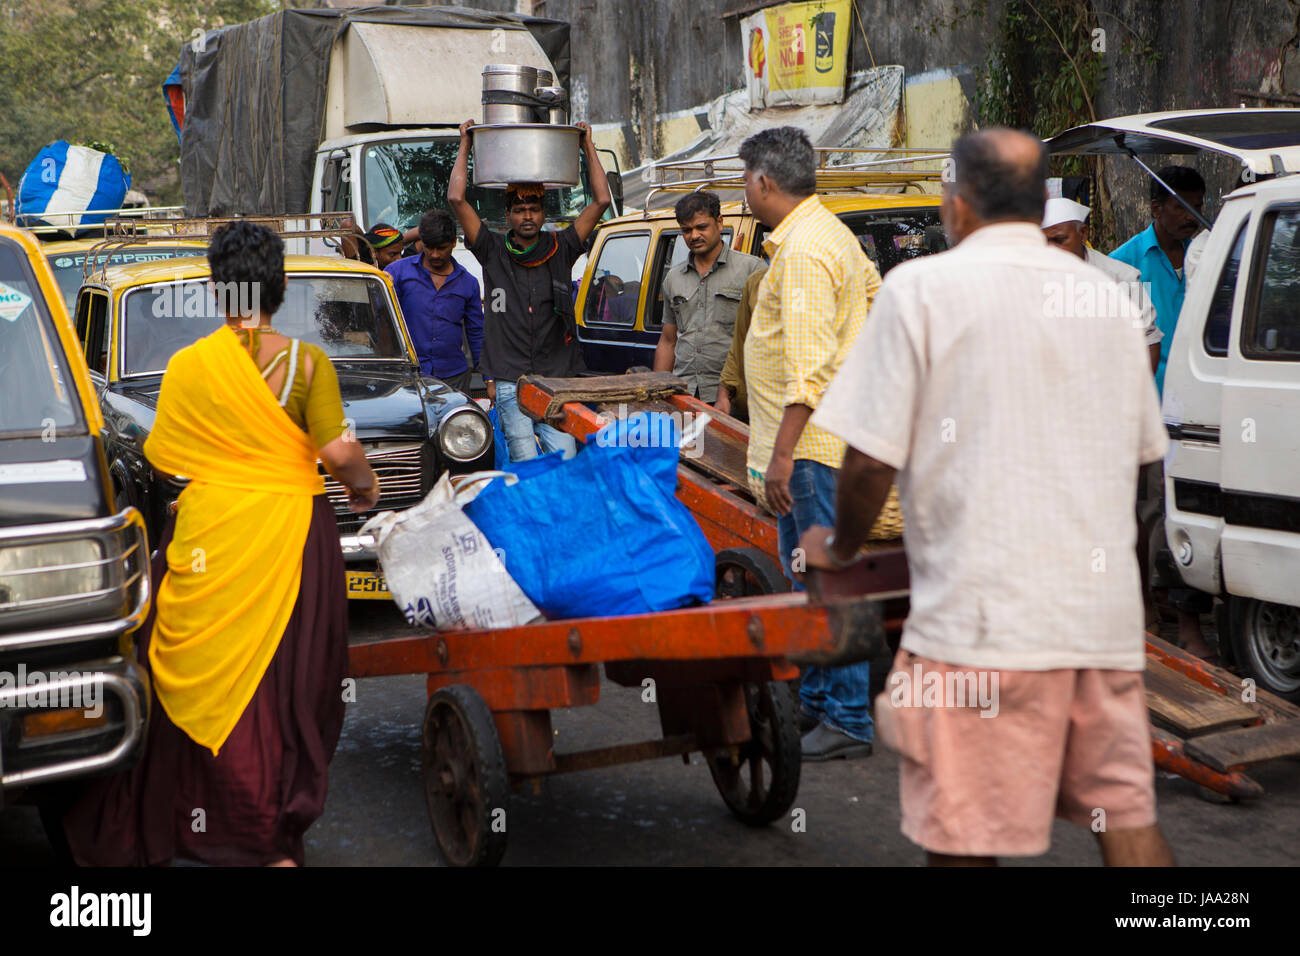 A busy street scene as people arrive and leave the fish market at Sassoon dock, Mumbai, India. Stock Photo